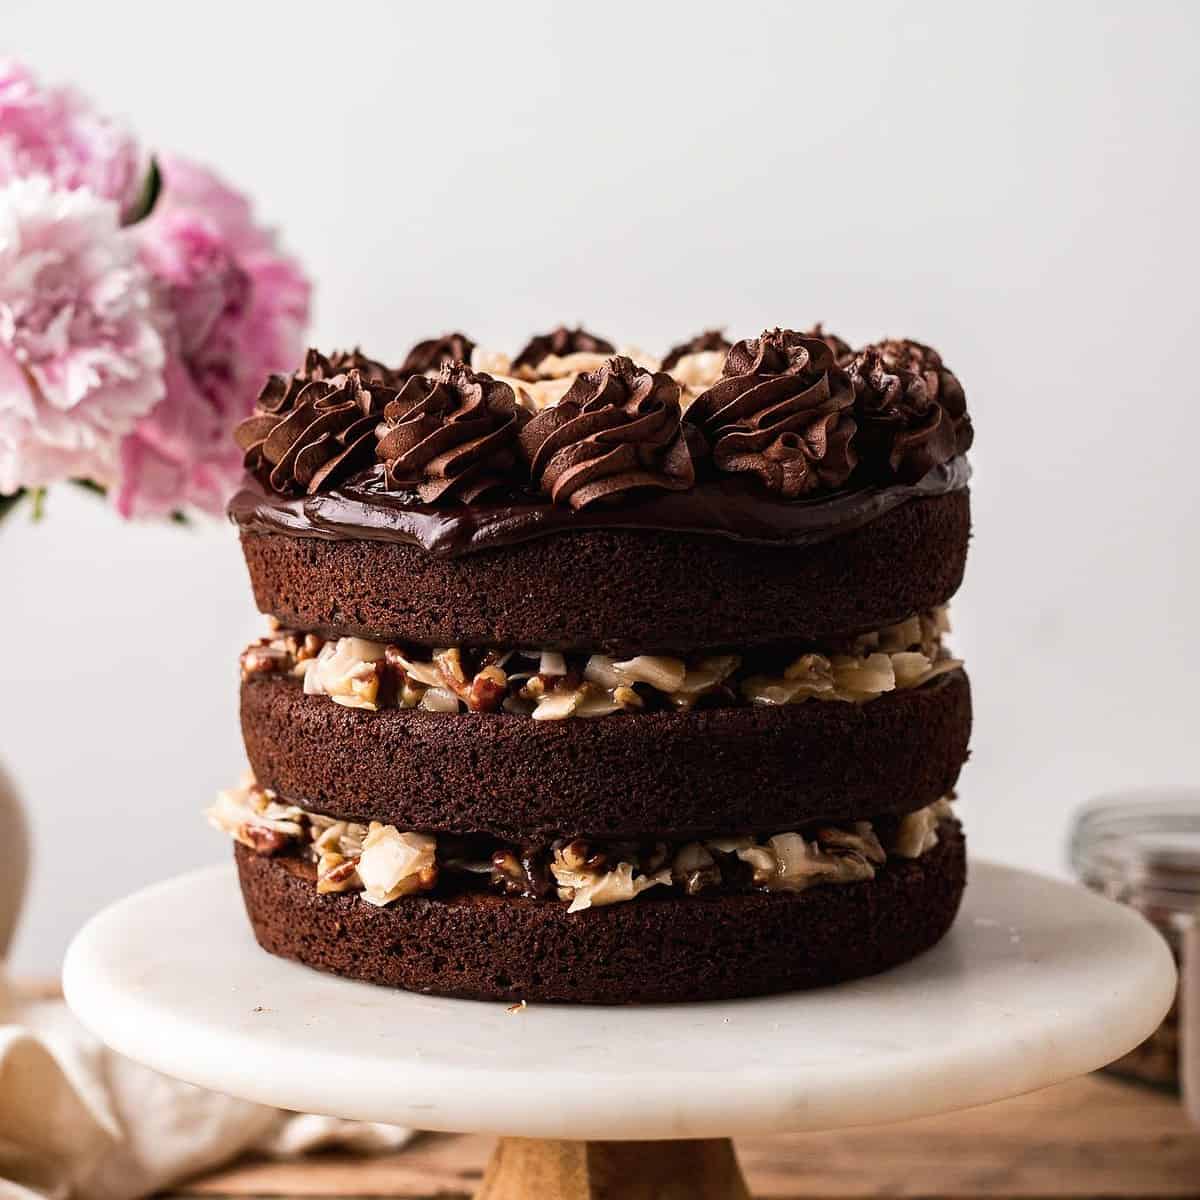  A moist, decadent cake that is sure to satisfy even the most demanding palates.